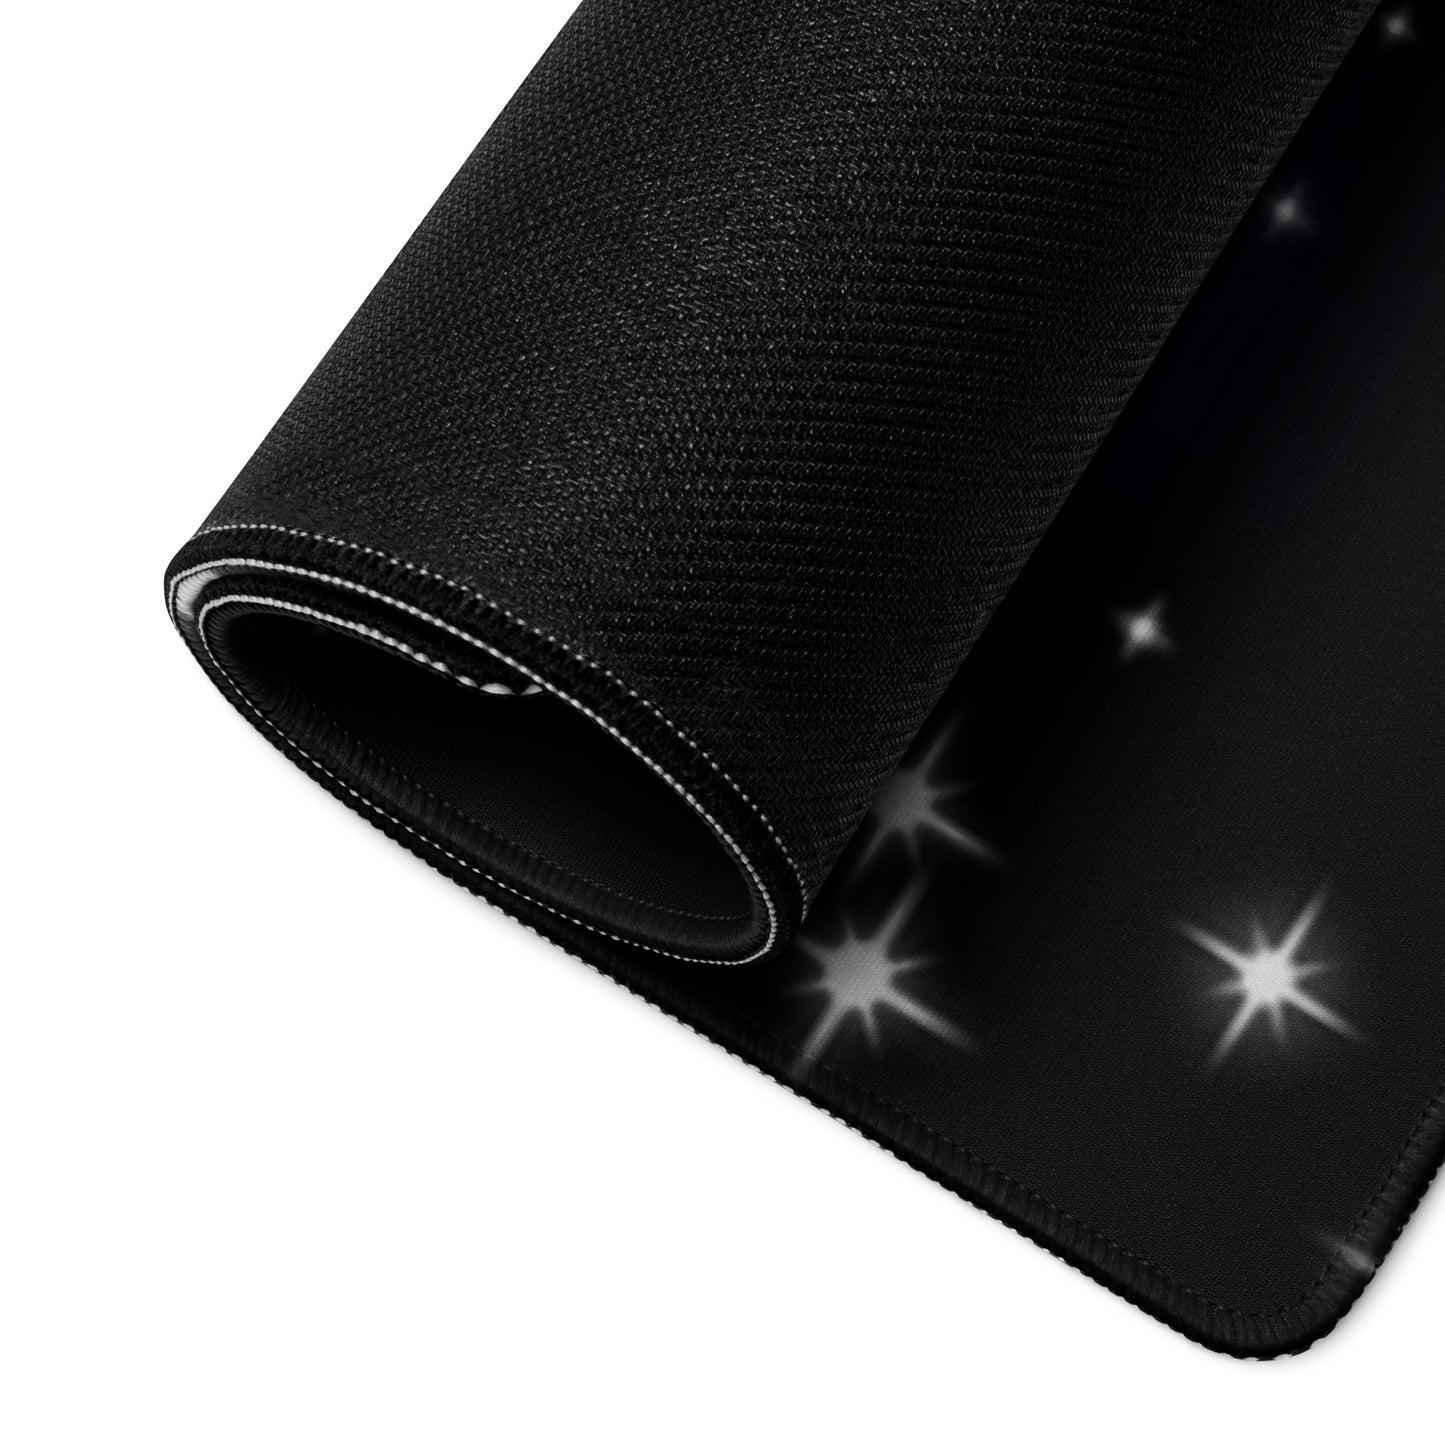 Neon Star Gaming Mouse Pad